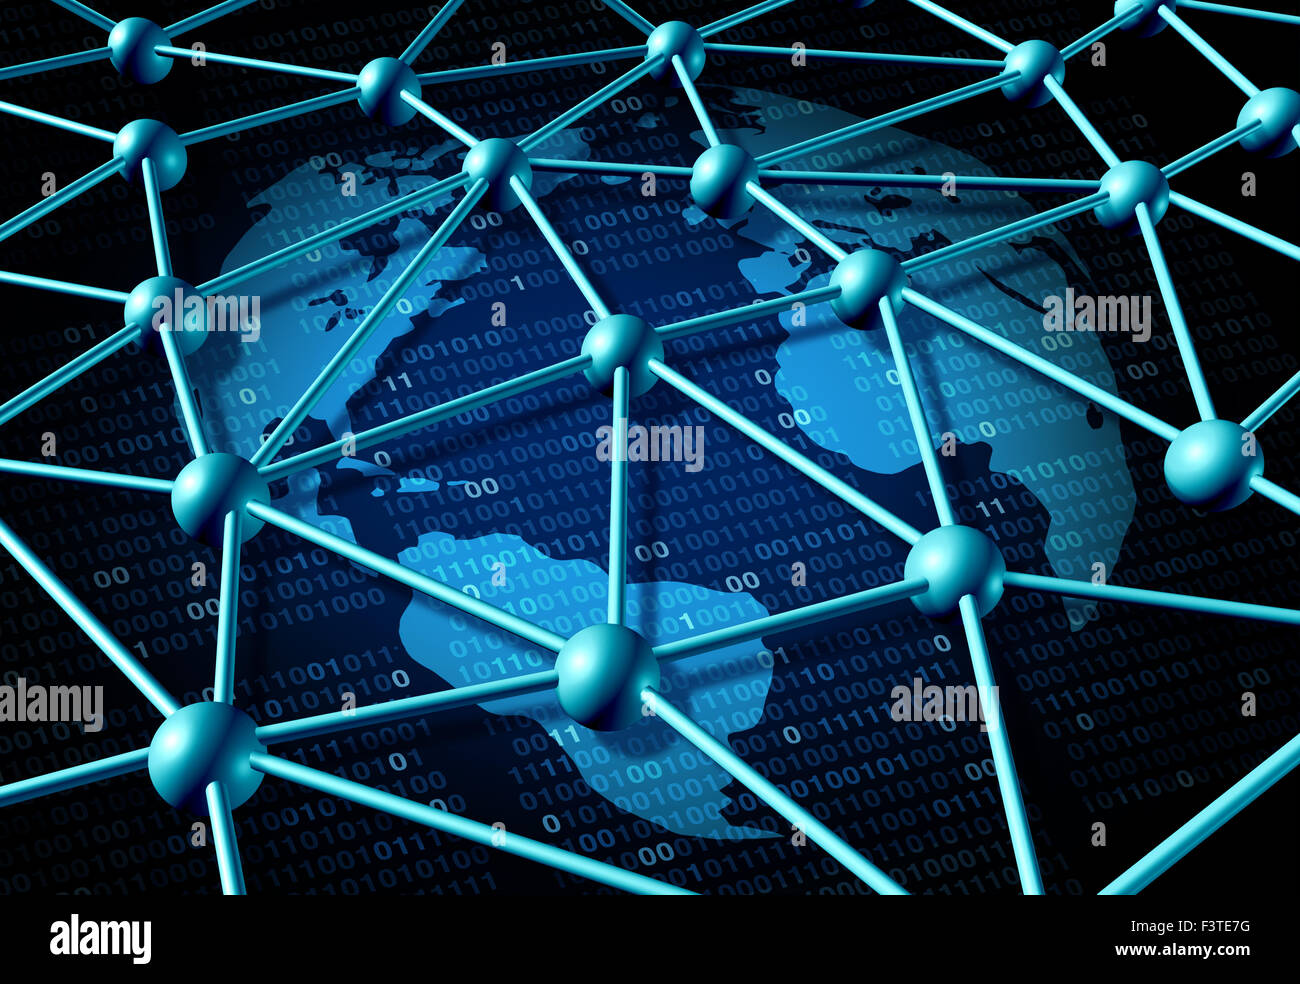 Global data network as an internet business concept with a worldwide technology symbol on binary code as an icon for connected software networking. Stock Photo